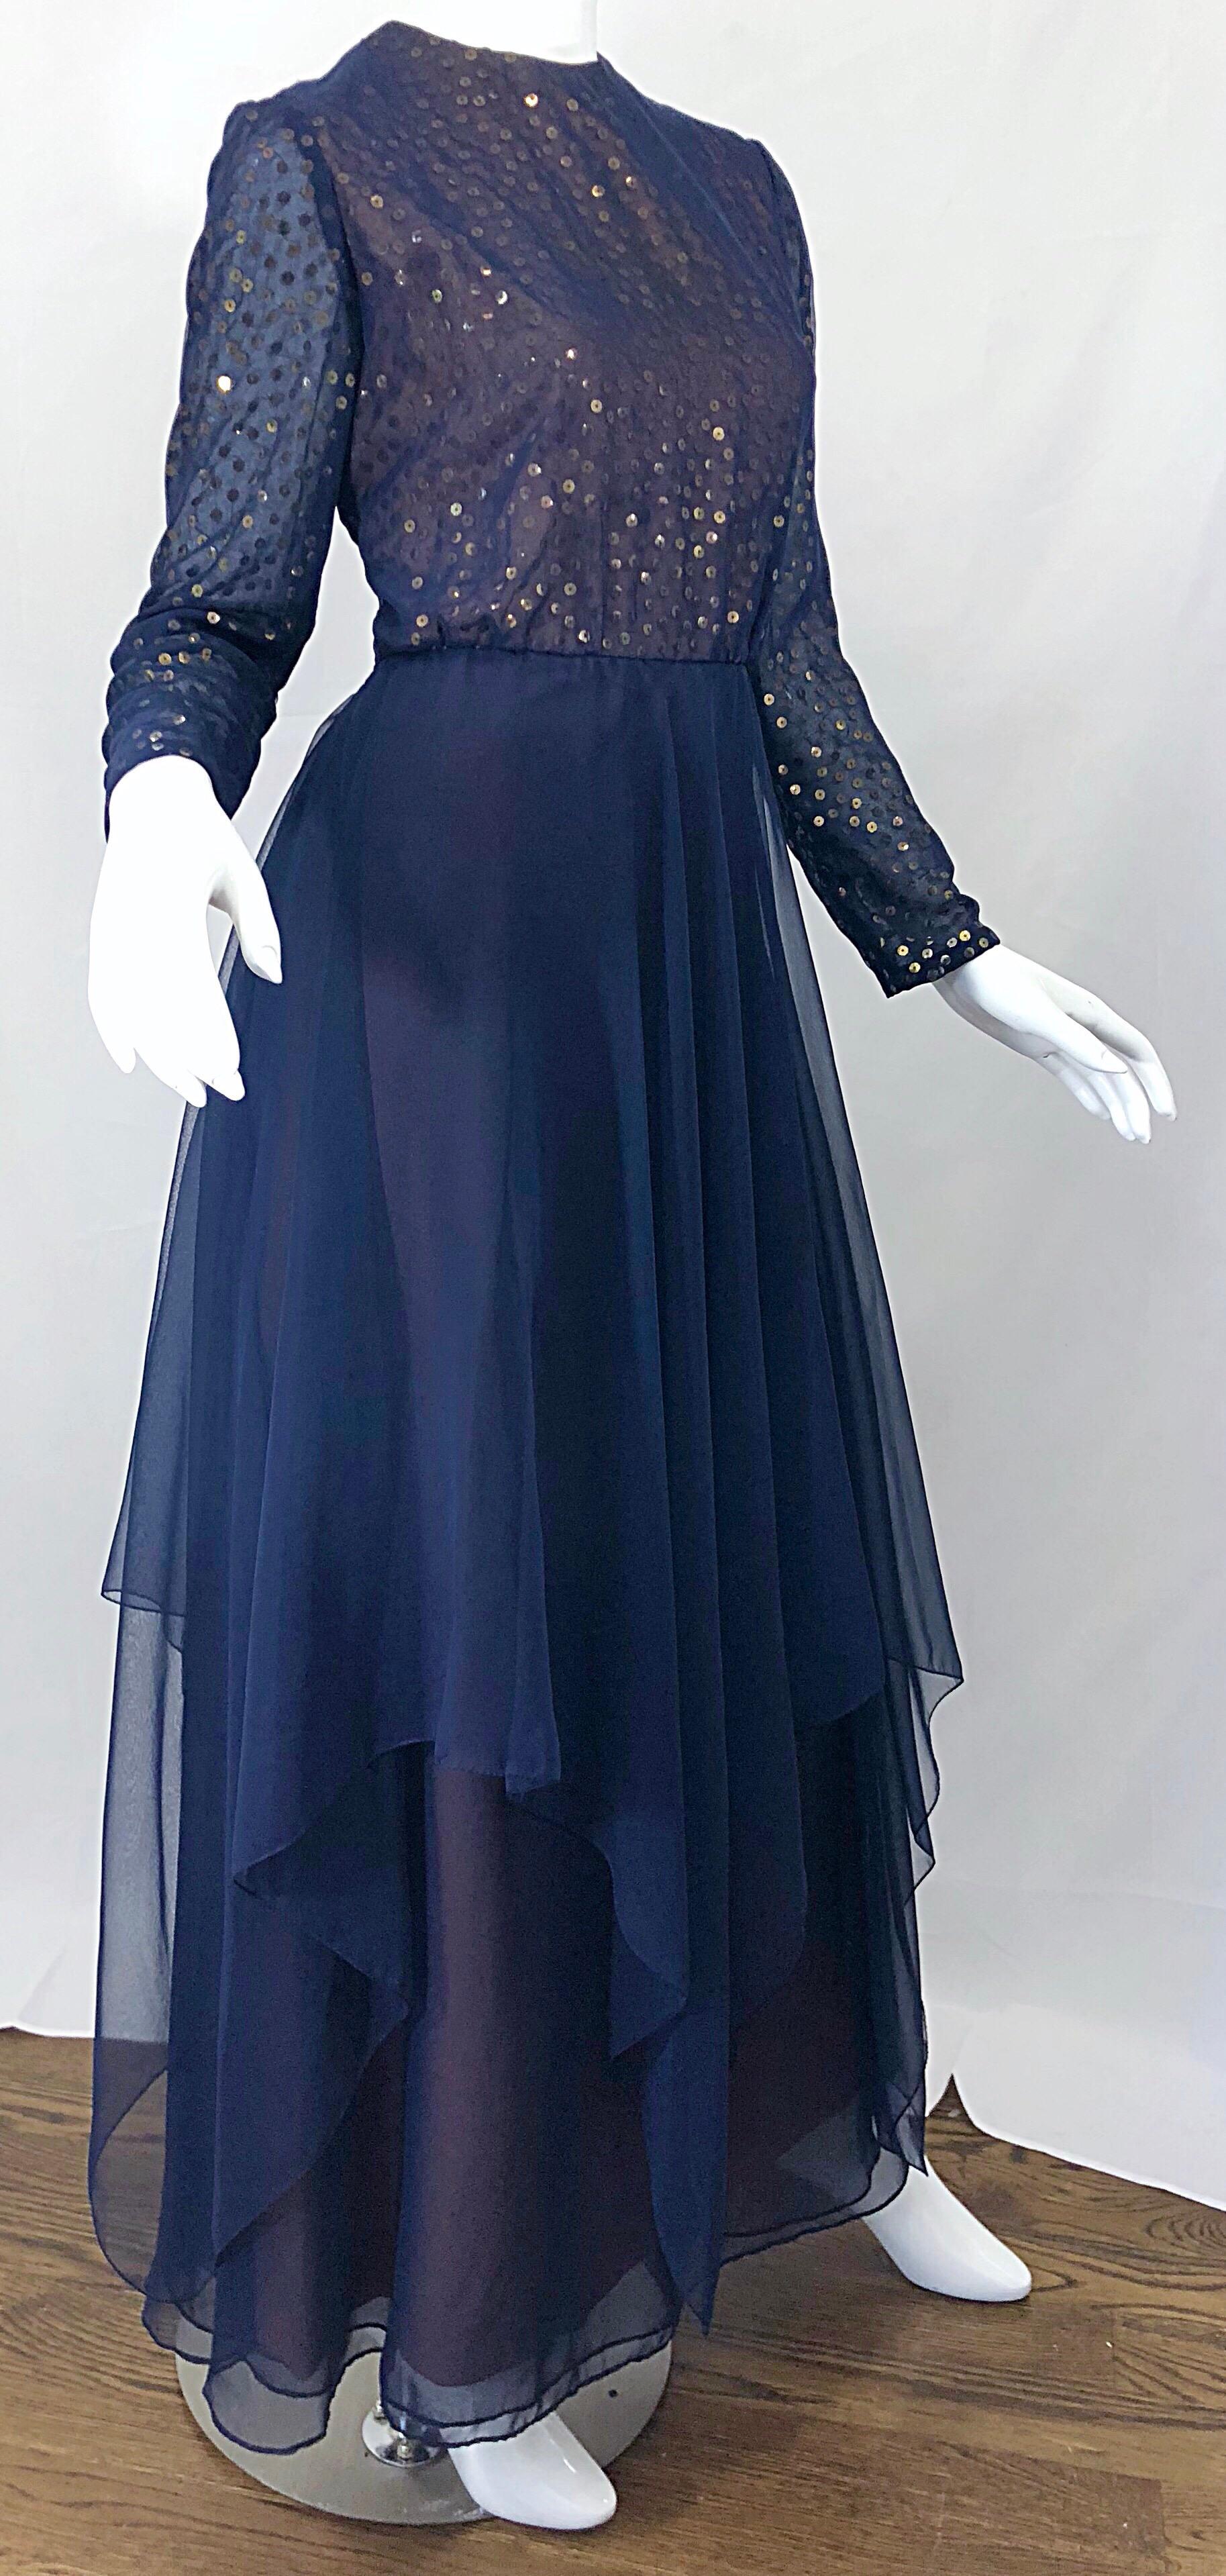 Gorgeous 1960s Kiki Hart Navy Blue Gold Sequin Vintage 60s Gown Evening Dress In Excellent Condition For Sale In San Diego, CA